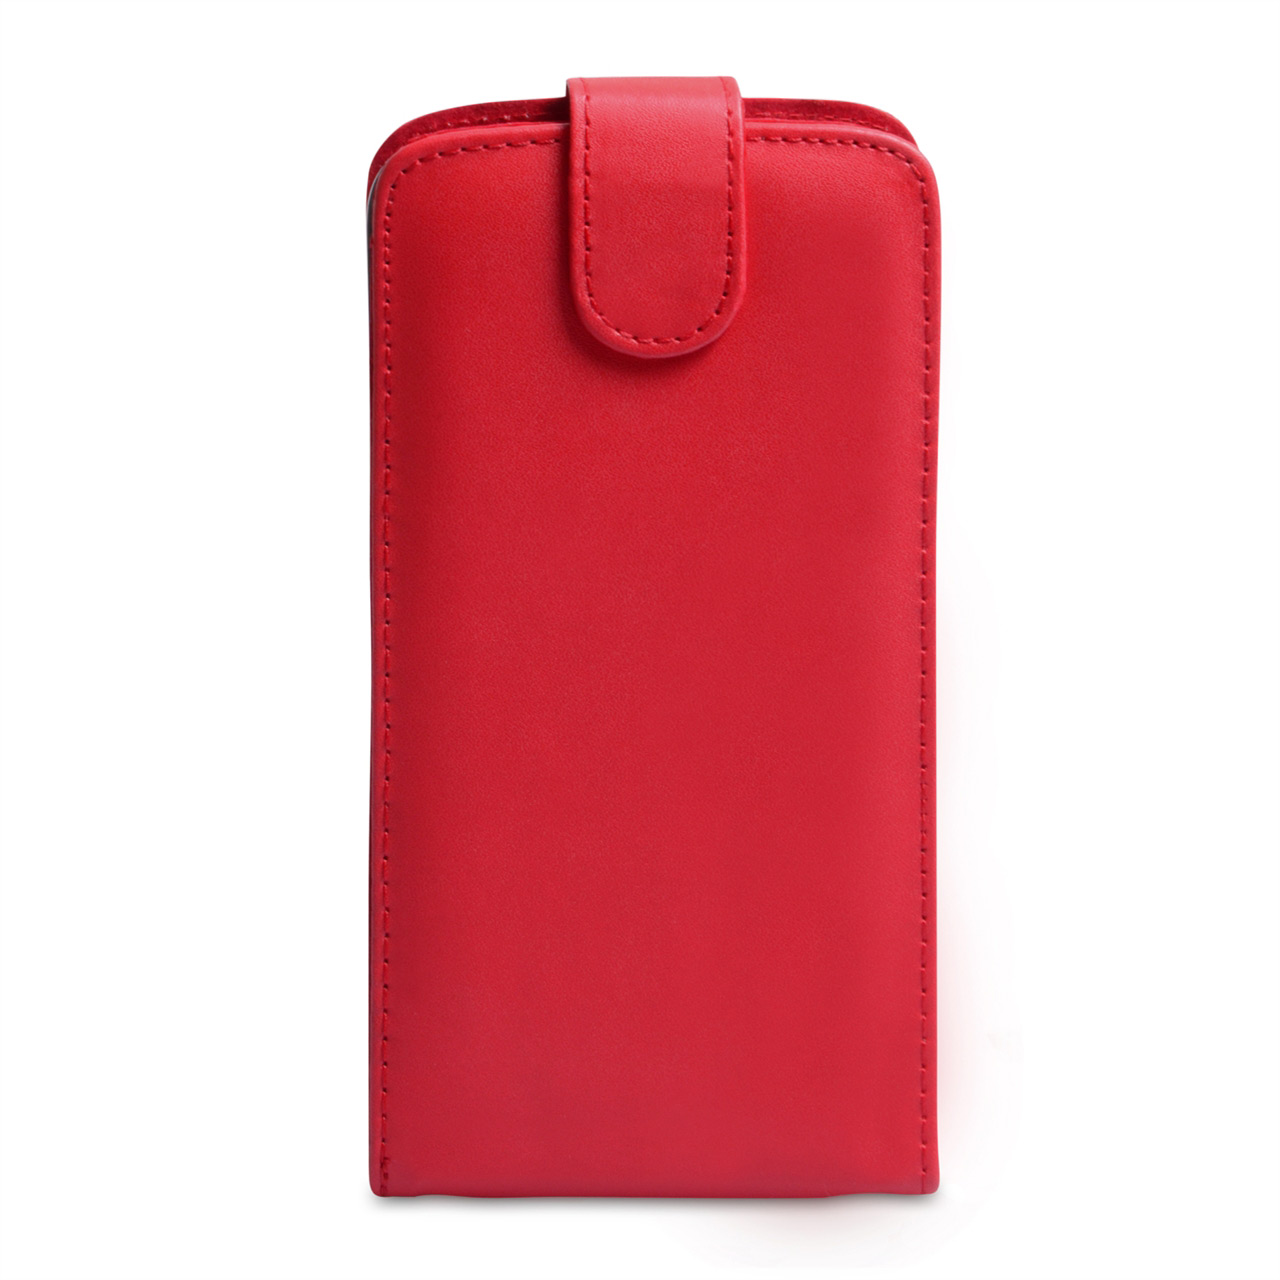 YouSave Samsung Galaxy Mega 6.3 Leather Effect Flip Case - Red